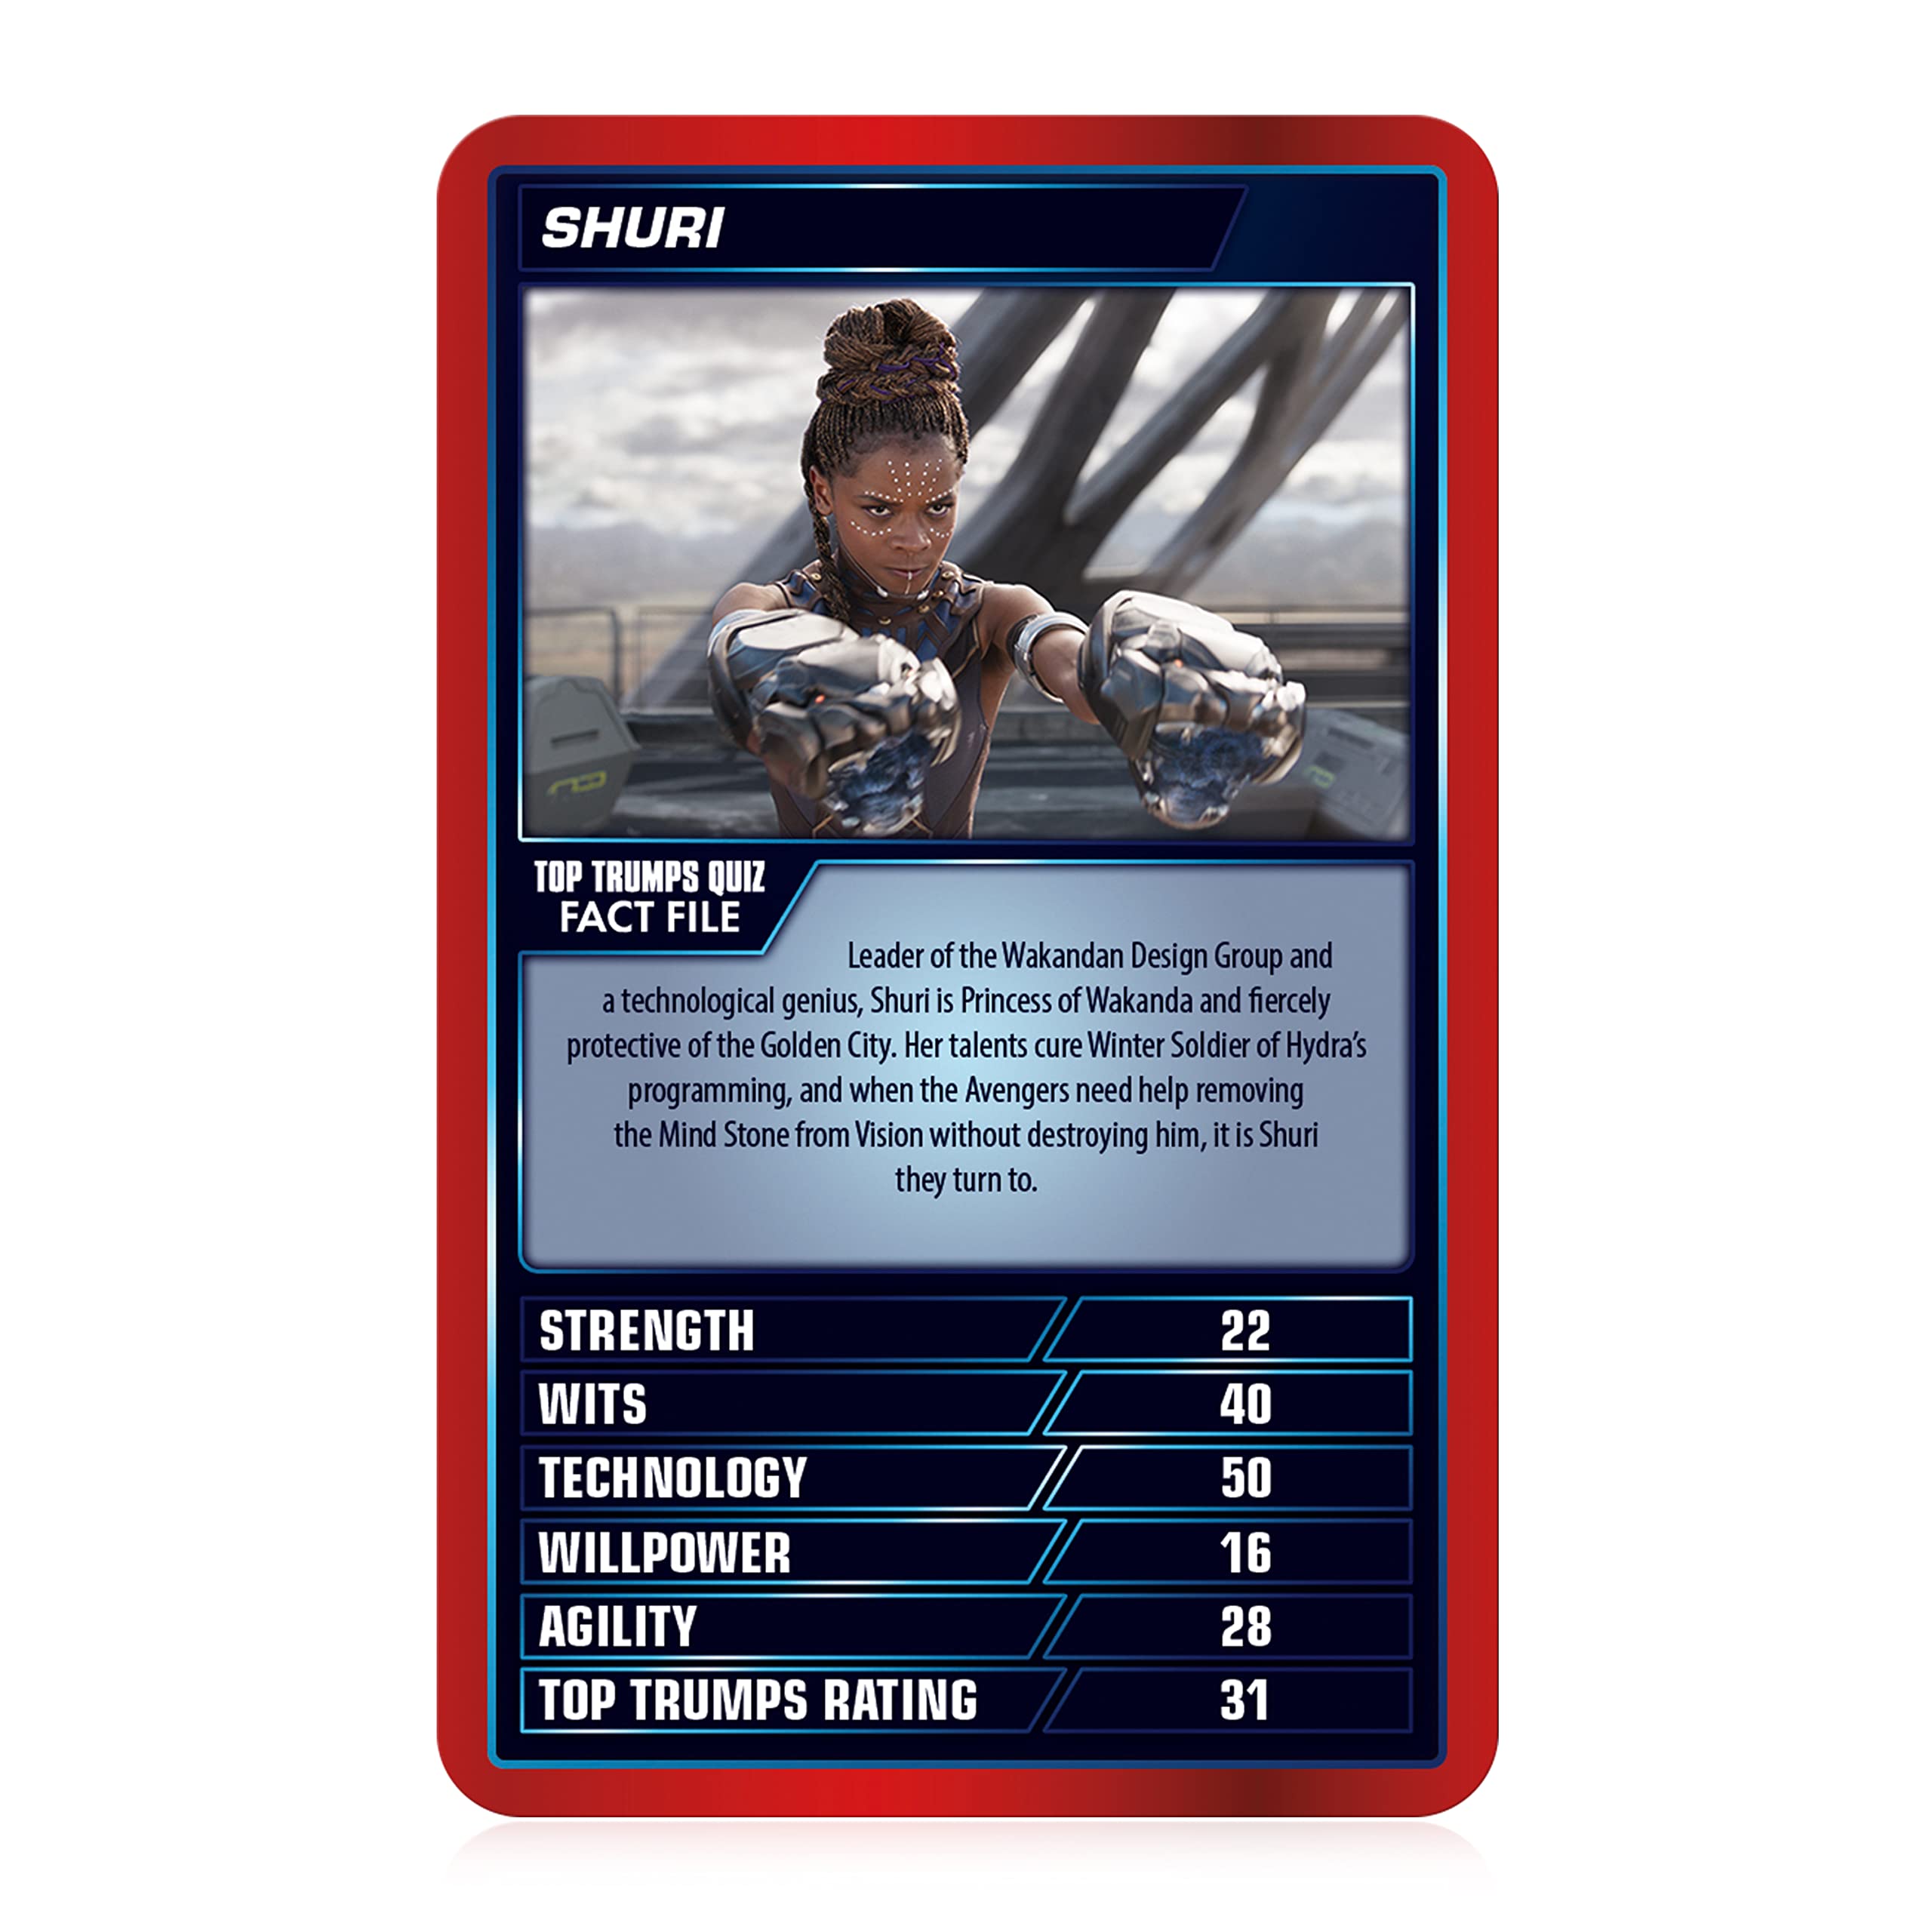 Top Trumps Marvel Cinematic Universe Special Card Game for ages 6 years and up